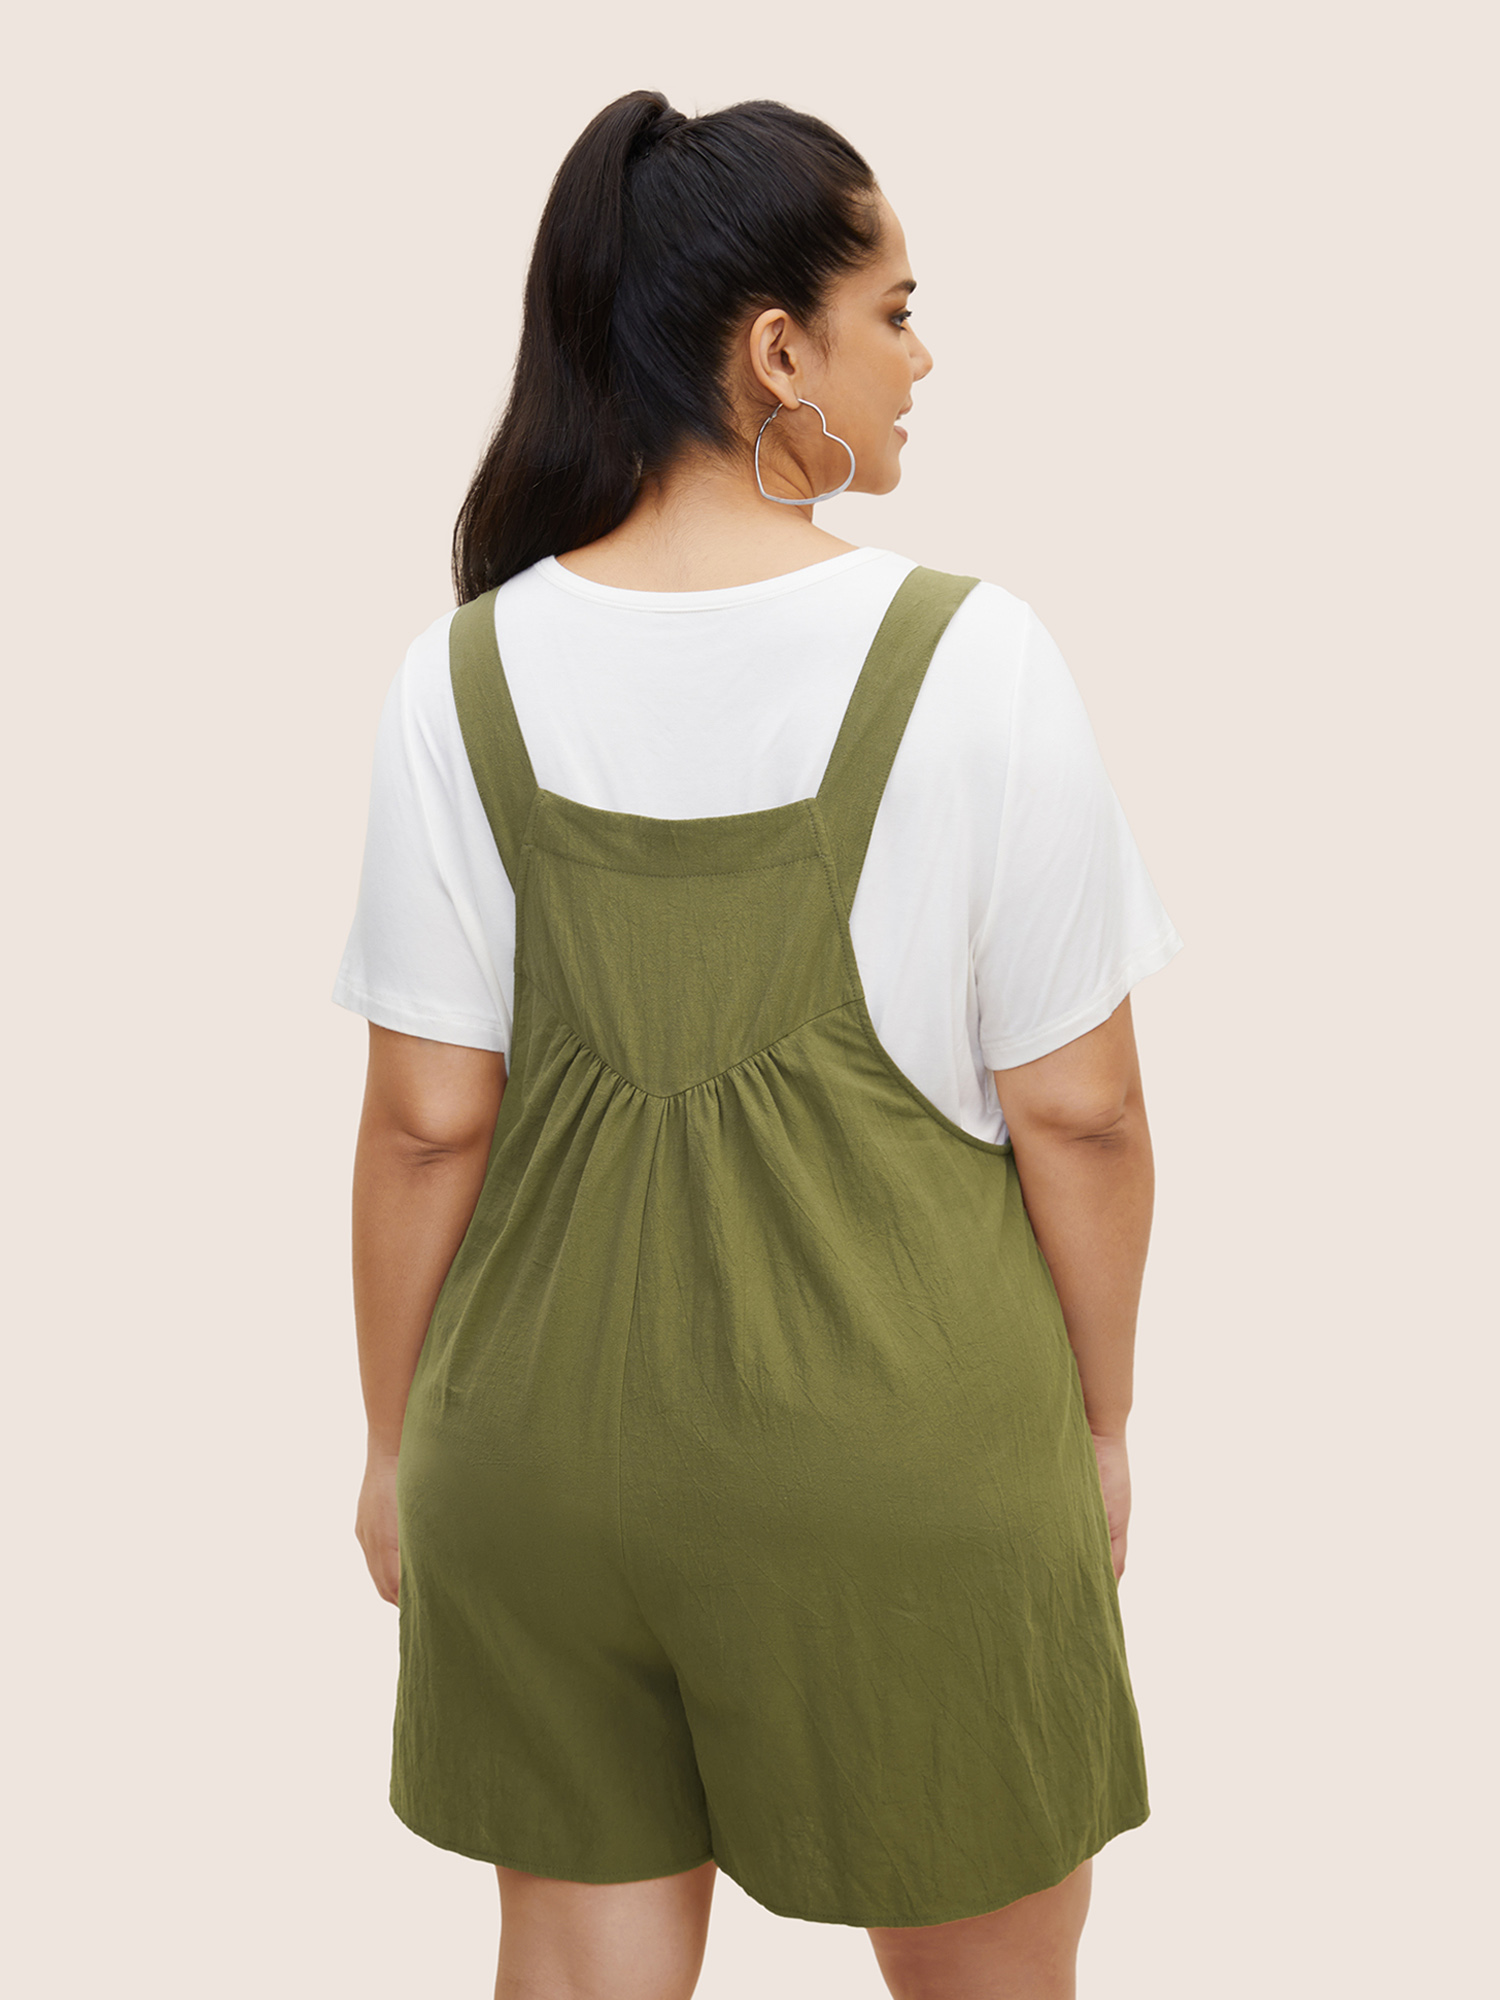 

Plus Size ArmyGreen Cotton Plain Textured Patch Pocket Jumpsuit Women Casual Sleeveless Square Neck Everyday Loose Jumpsuits BloomChic